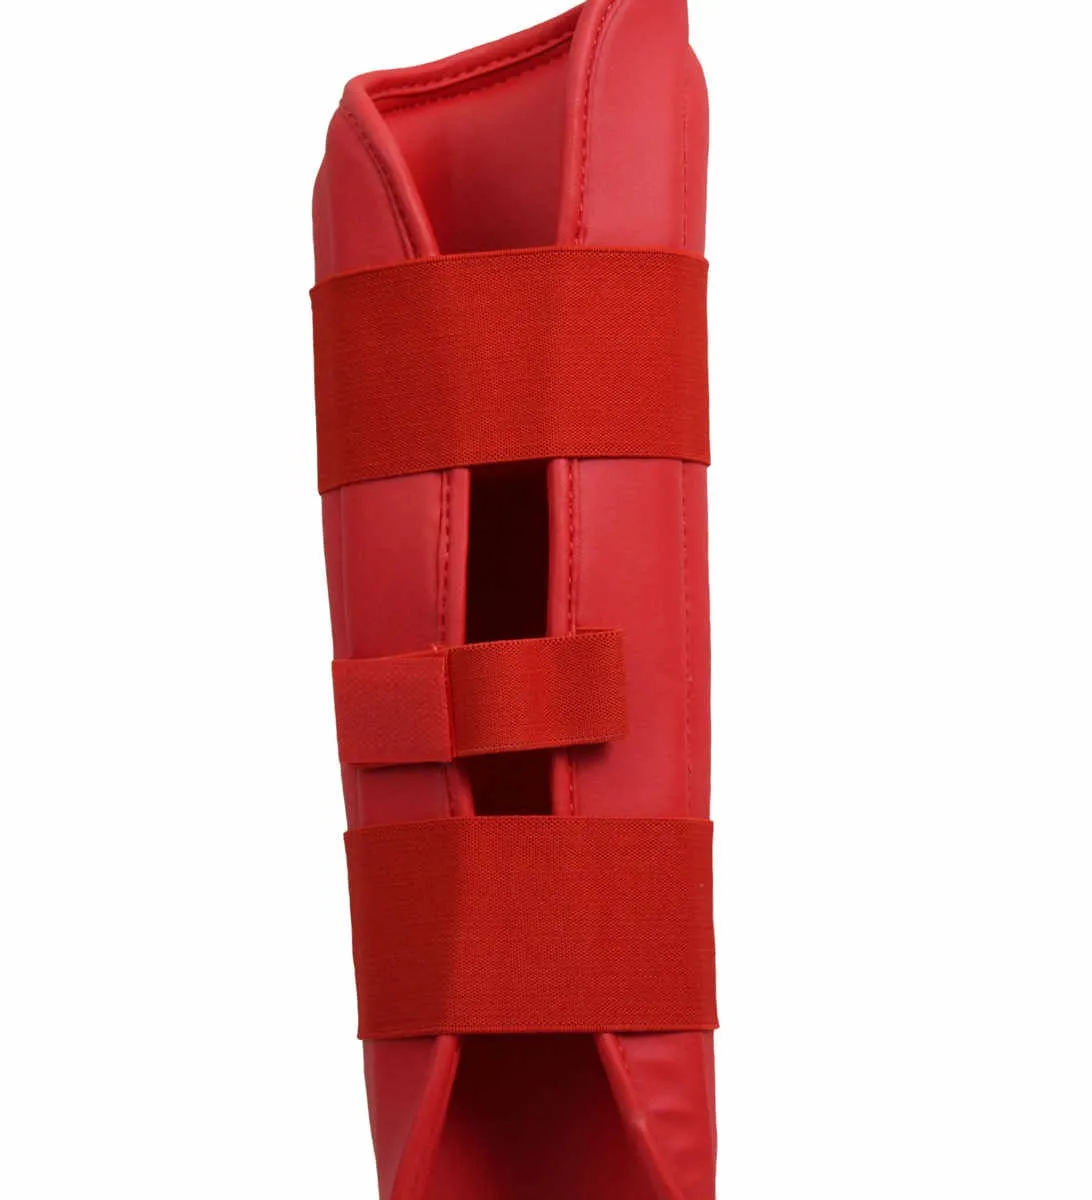 Shin guard instep protection red